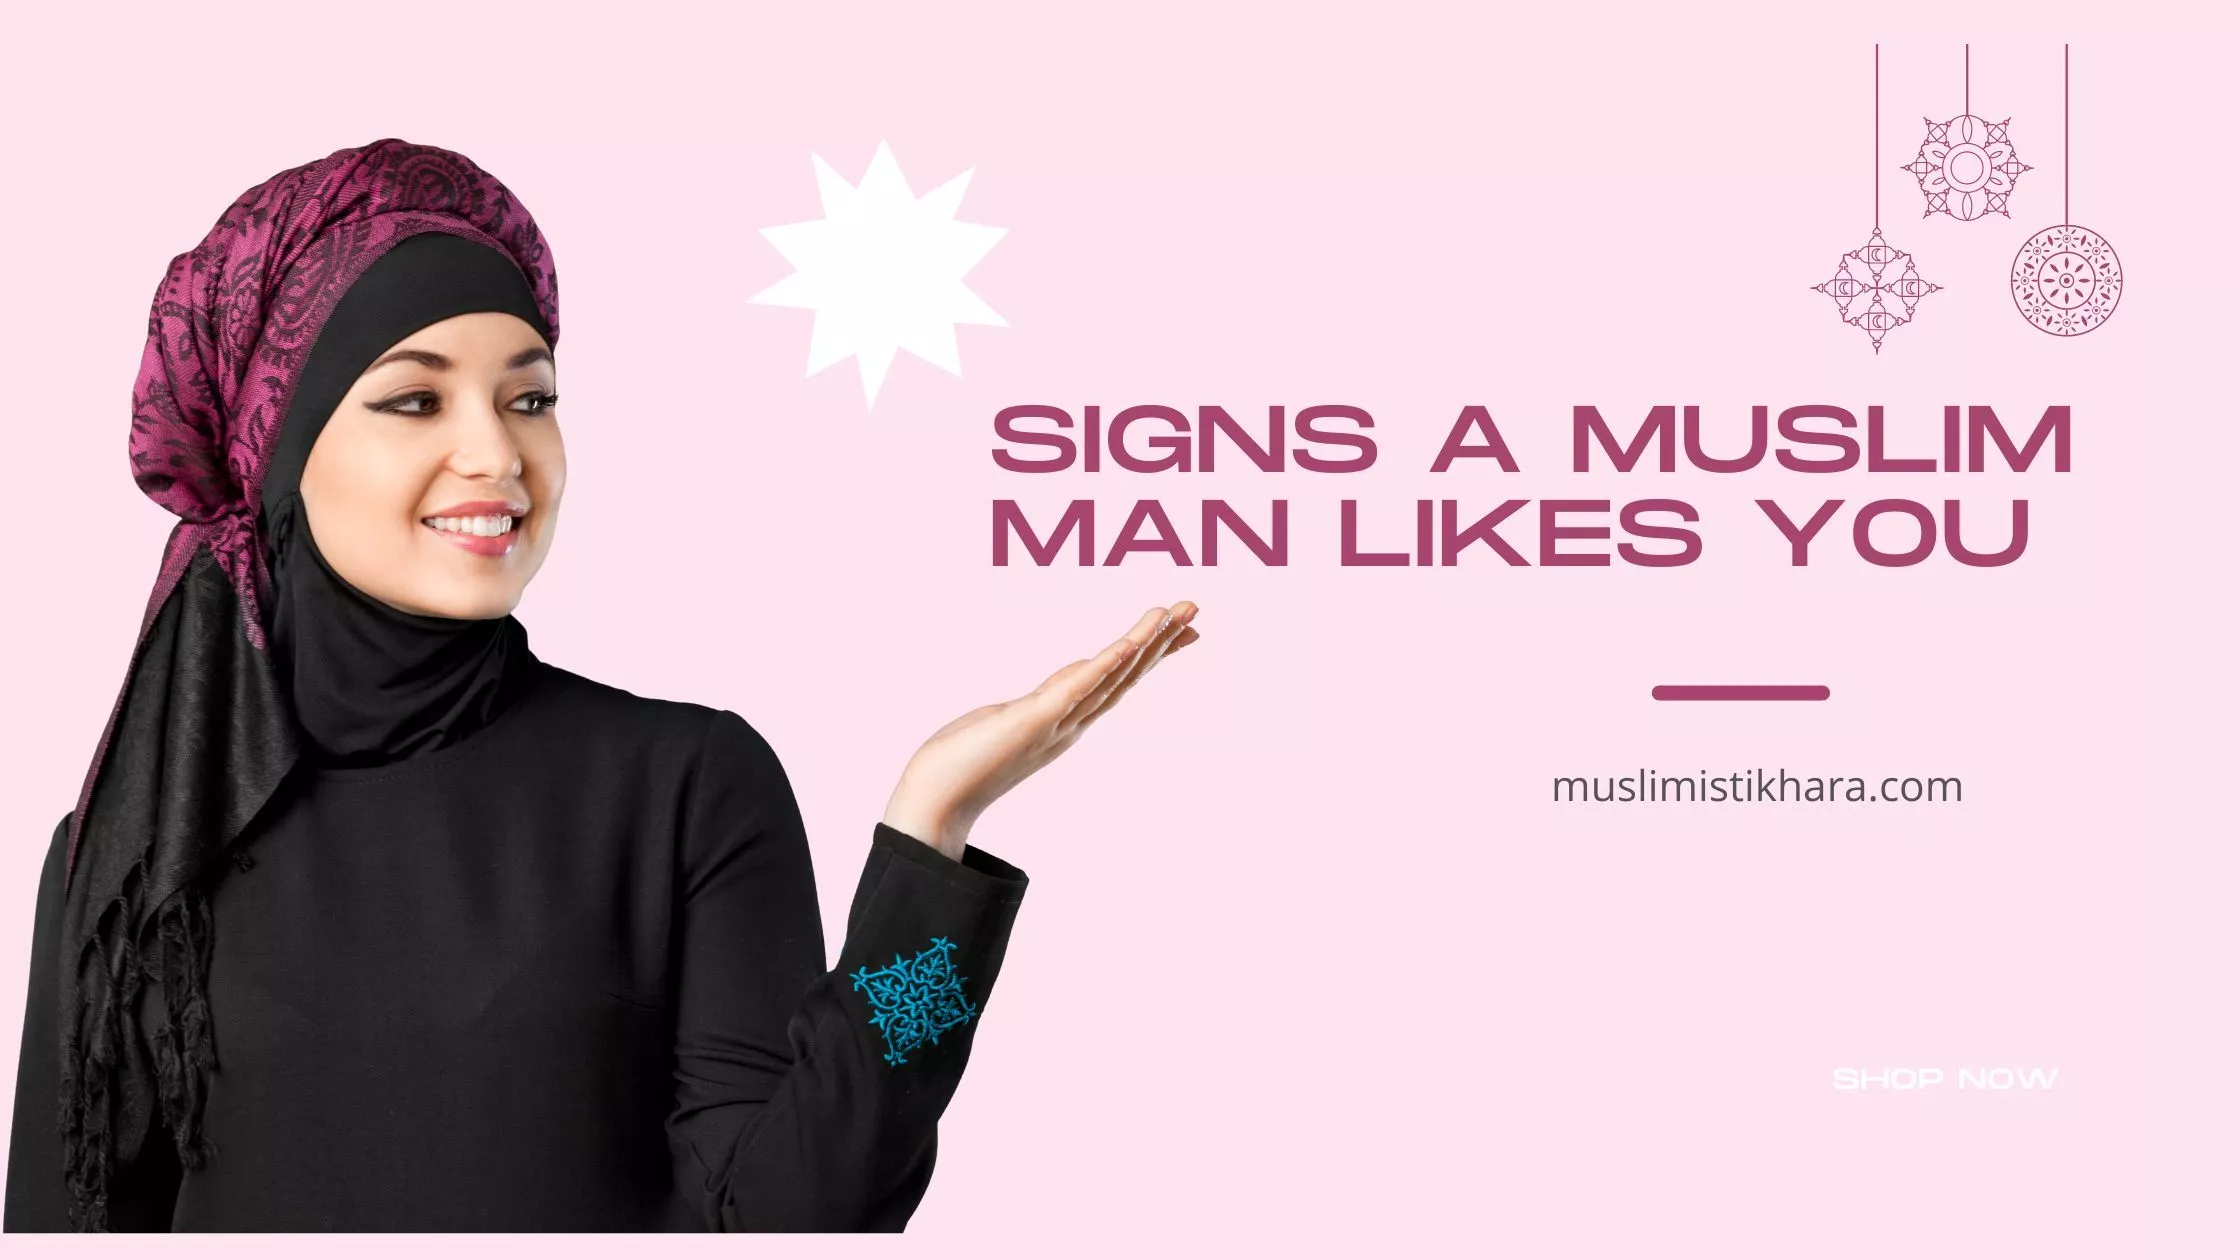 Signs a Muslim Man Likes You